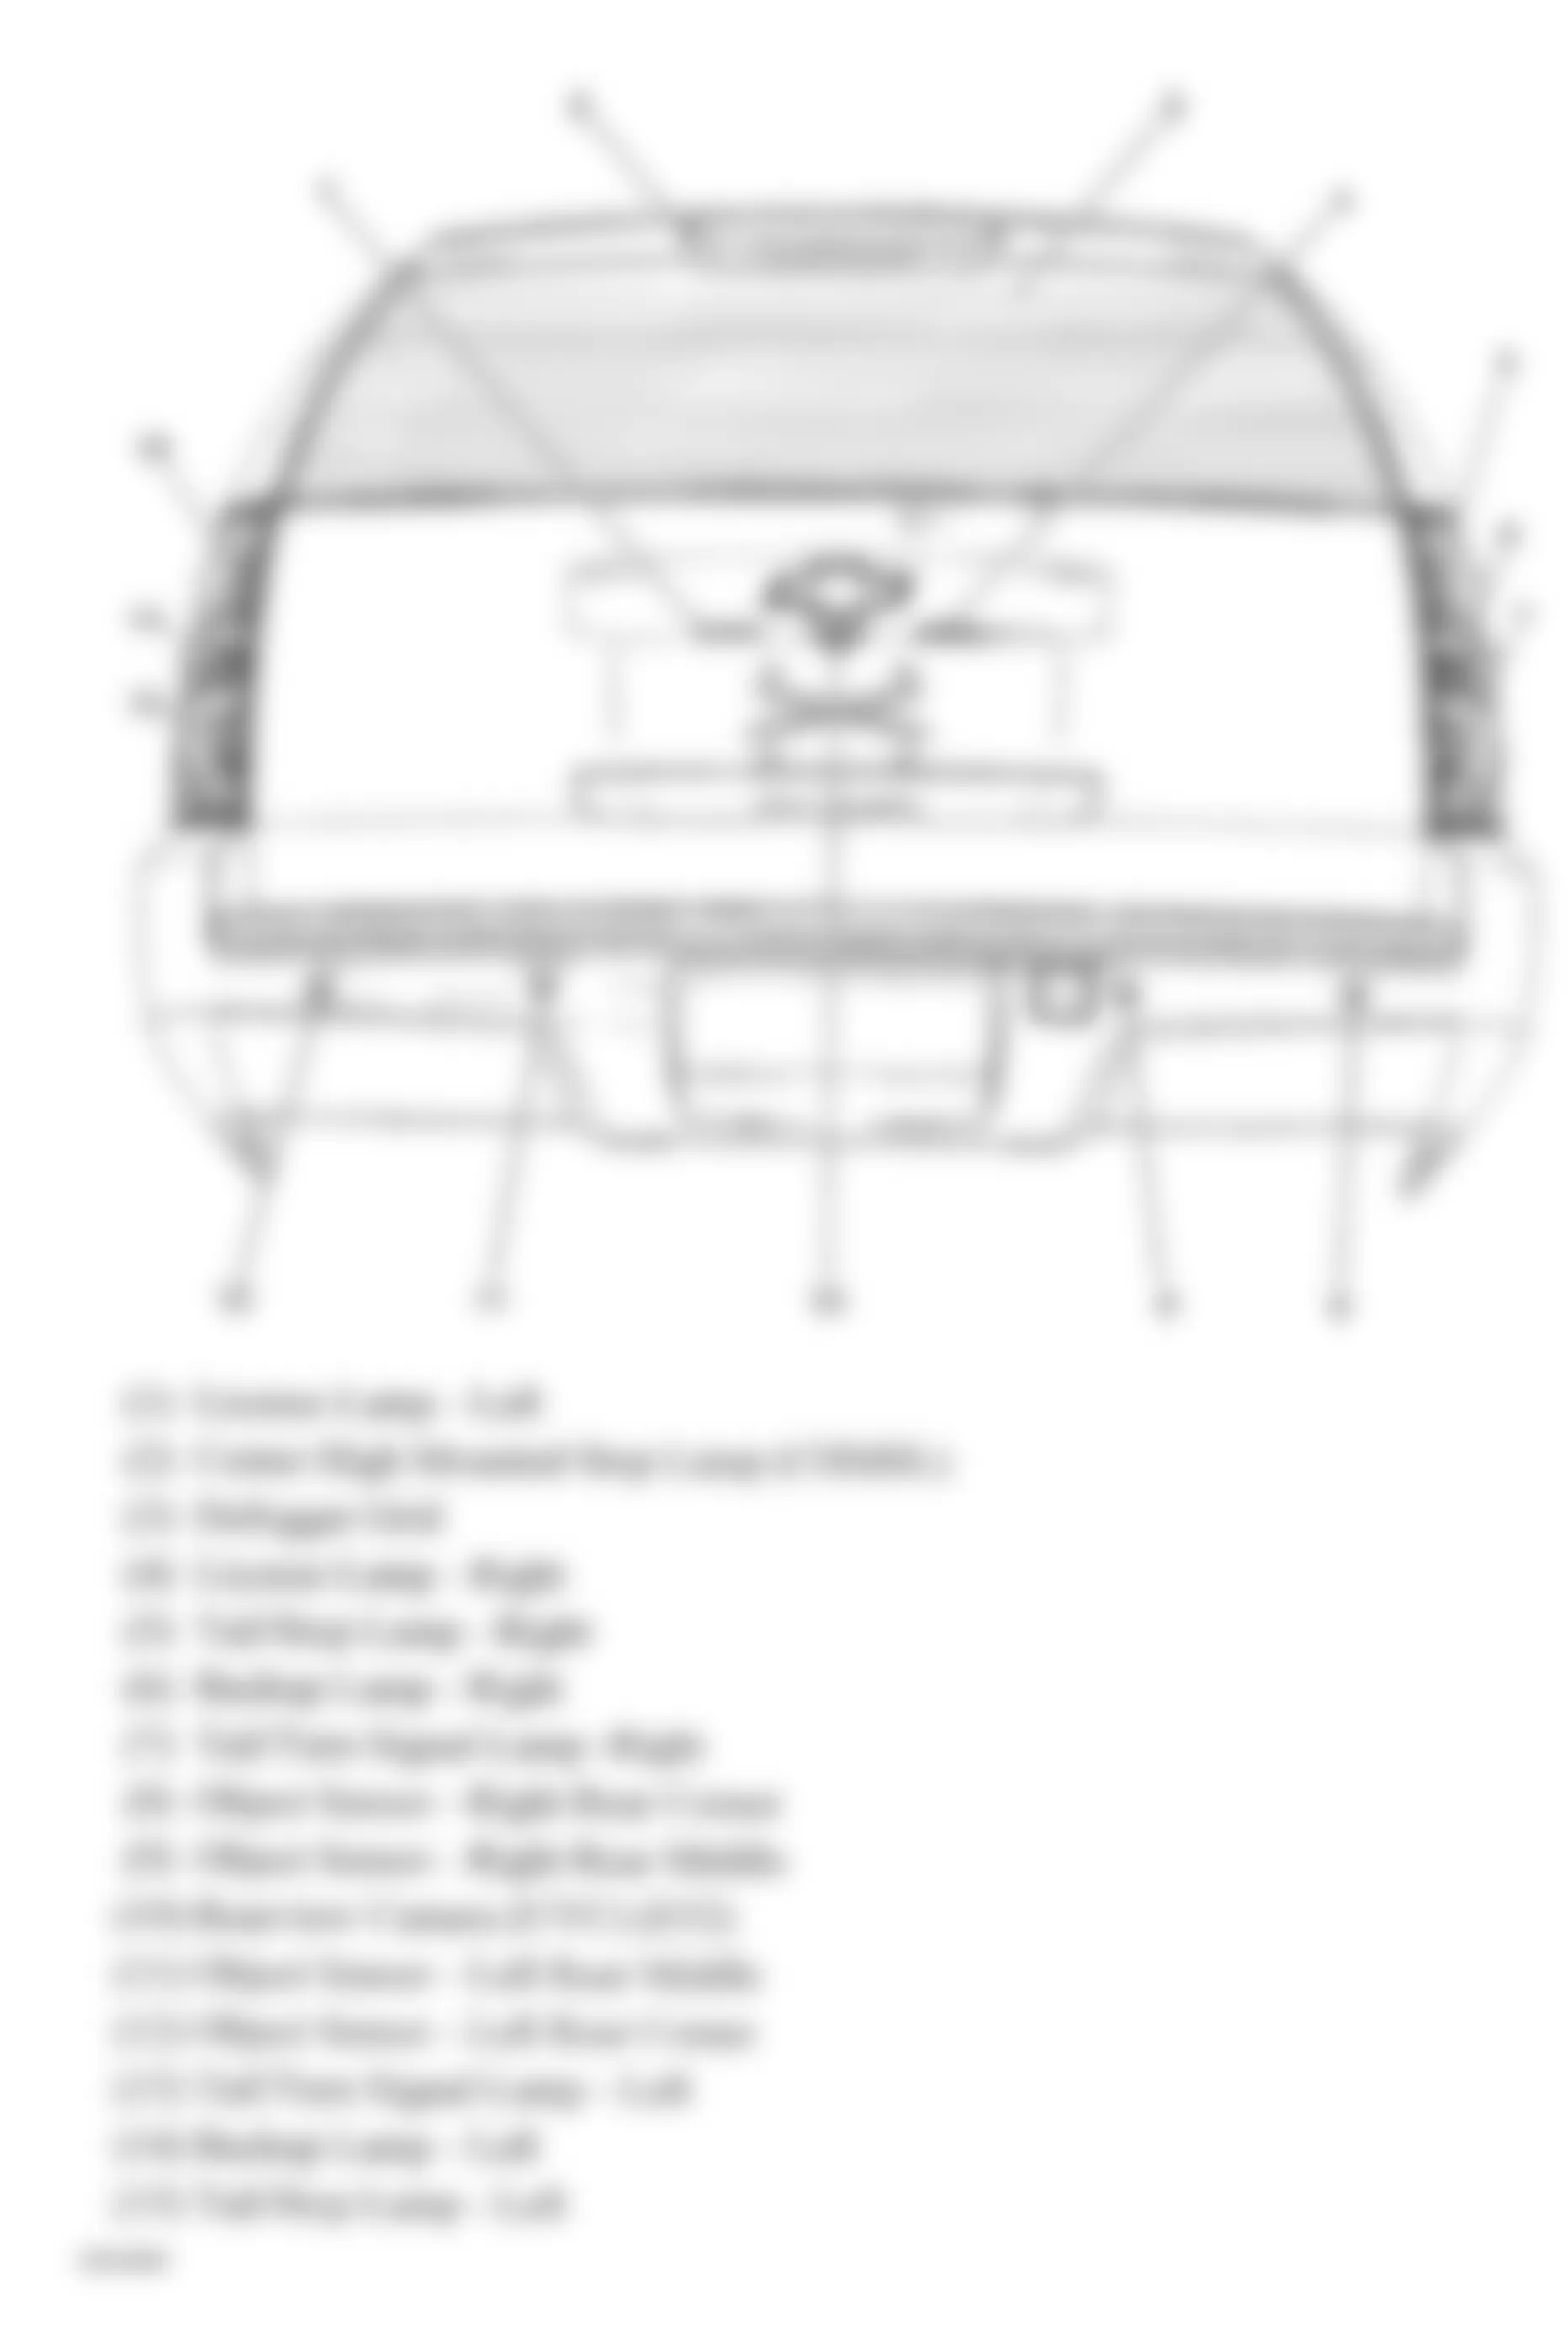 GMC Yukon XL K1500 2008 - Component Locations -  Rear Of Vehicle (Avalanche, Suburban & Tahoe W/One Piece Liftgate)